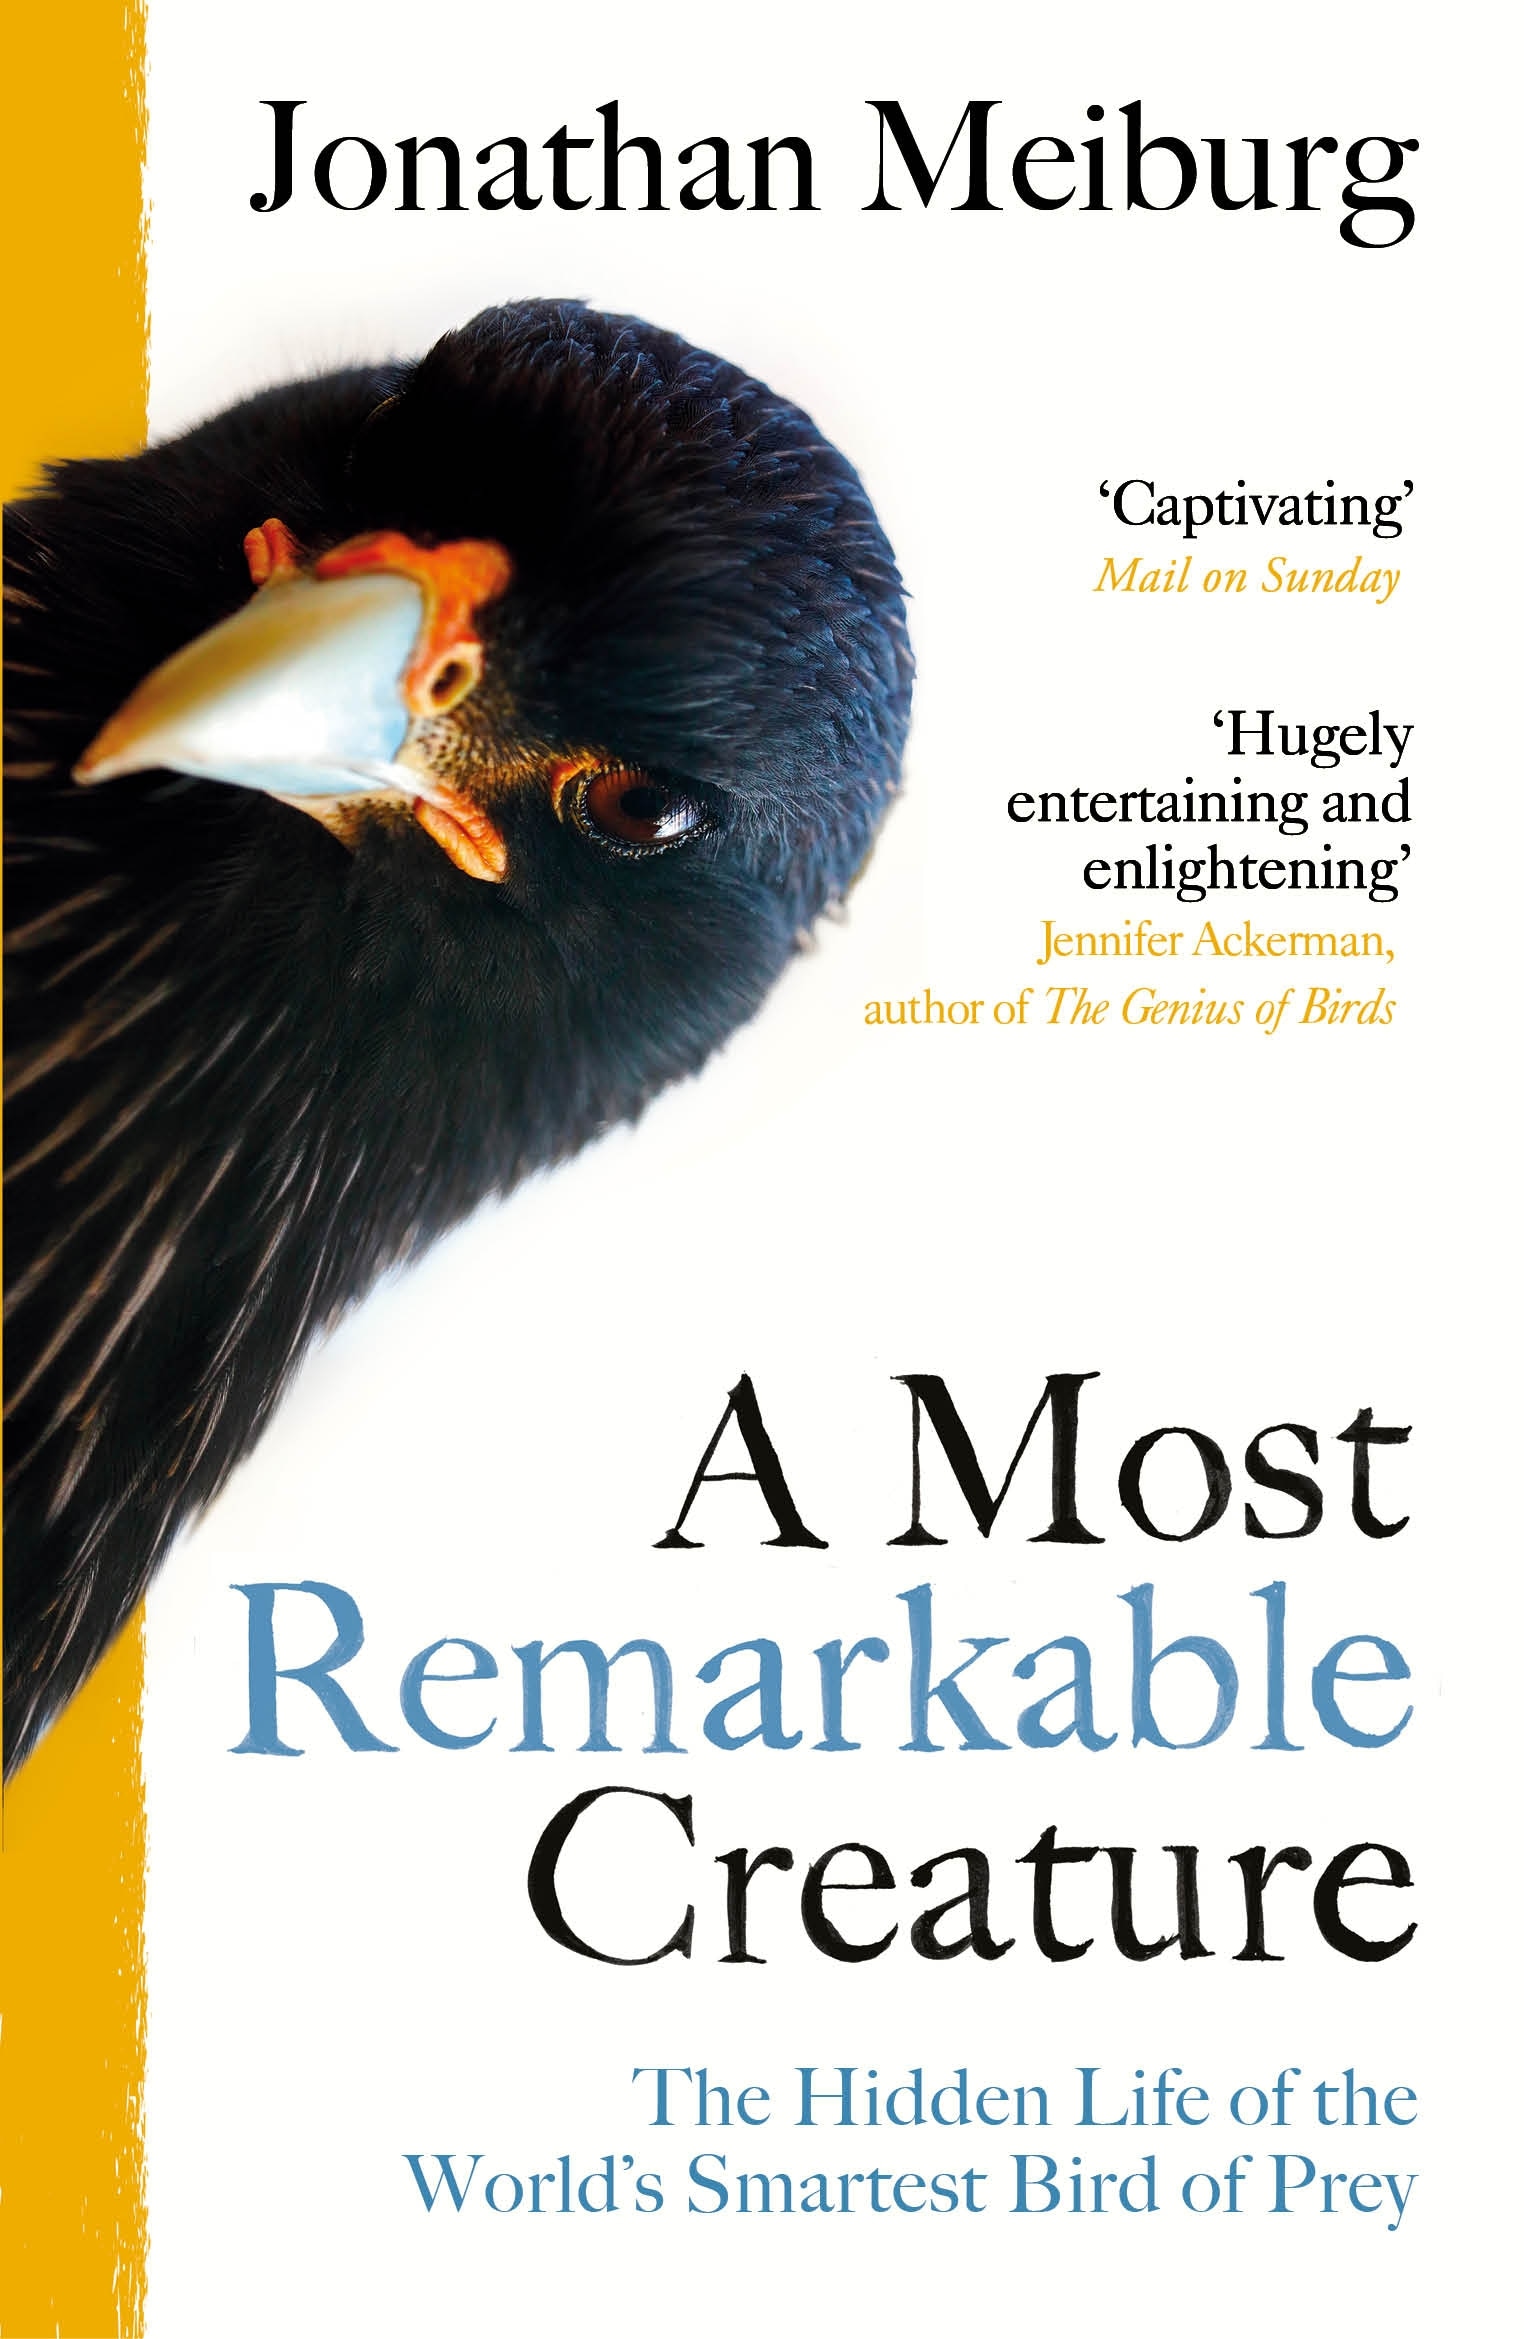 Book “A Most Remarkable Creature” by Jonathan Meiburg — March 3, 2022